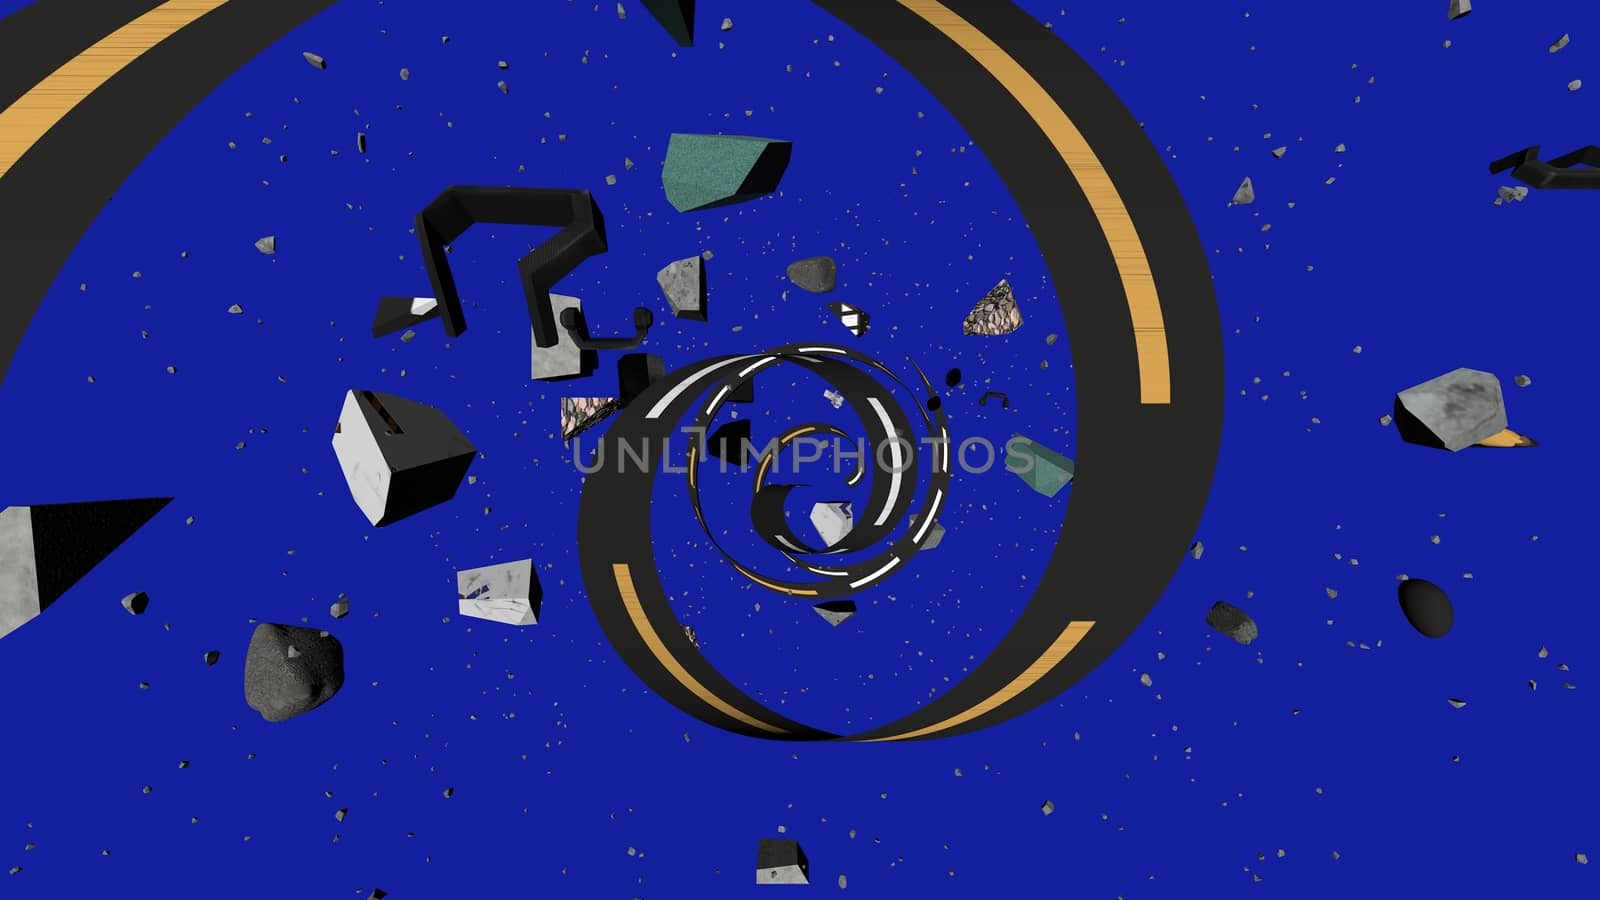 Original 3d illustration of a black and yellow stripe spiraling among stones flying in dark blue universe. It looks impressive, artistic and unusual.